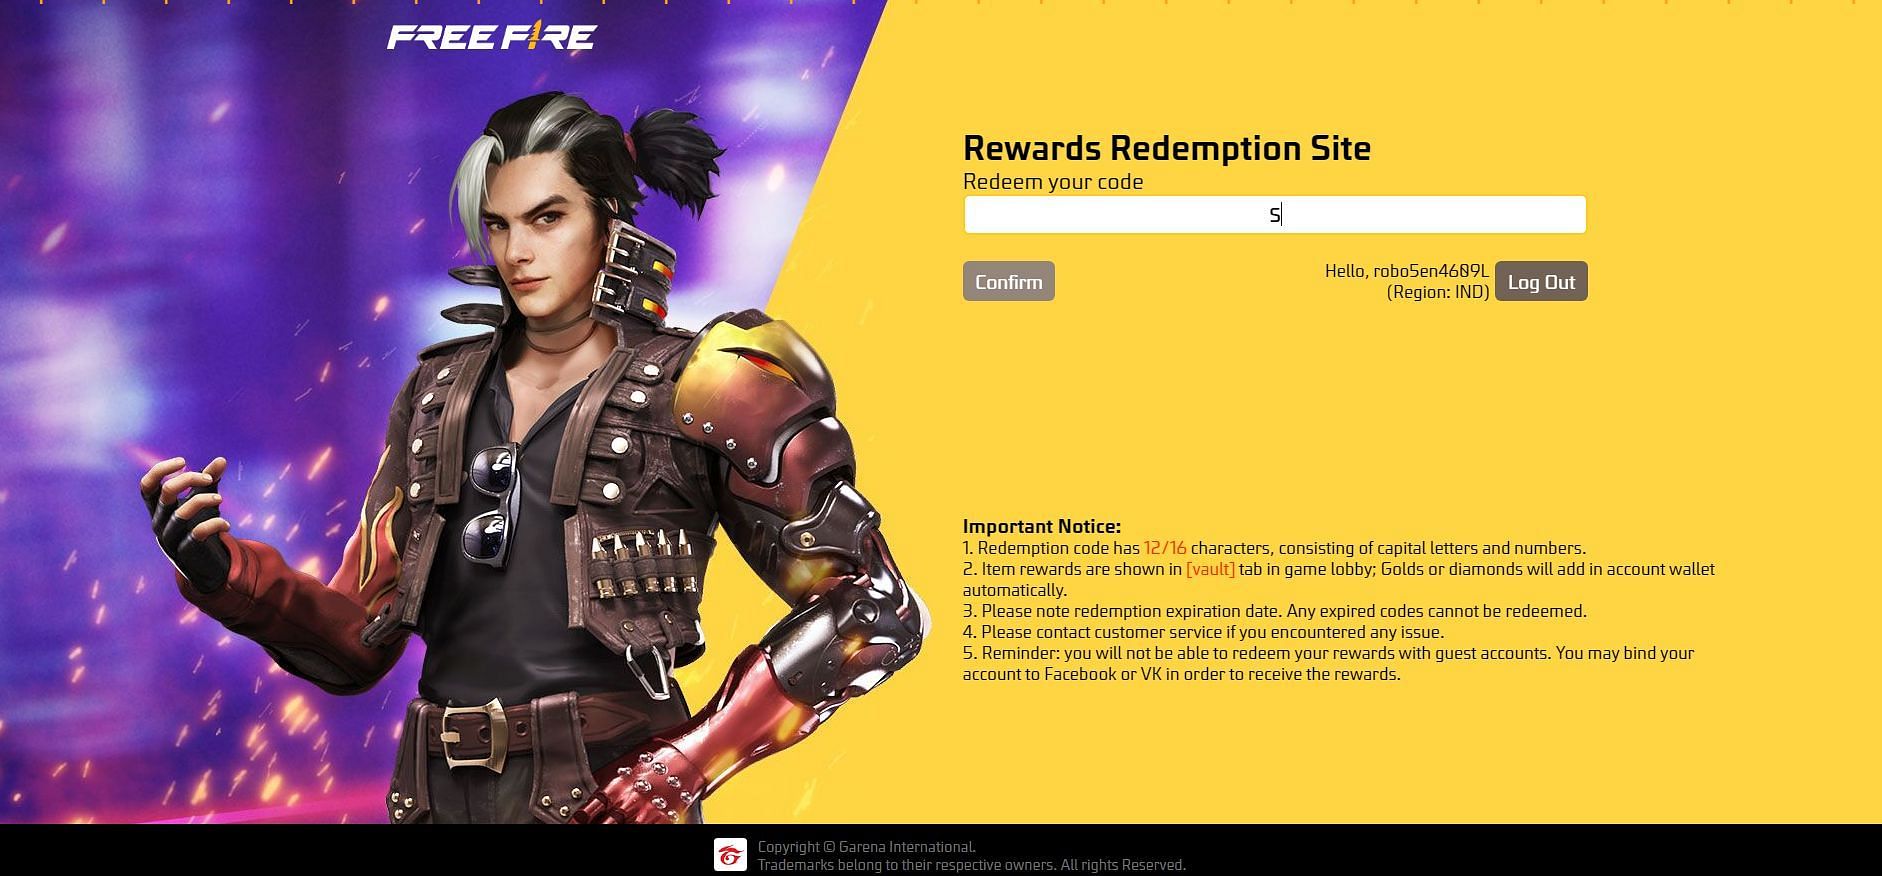 Redemption codes also offer free rewards that include Free Fire MAX diamonds (Image via Garena)